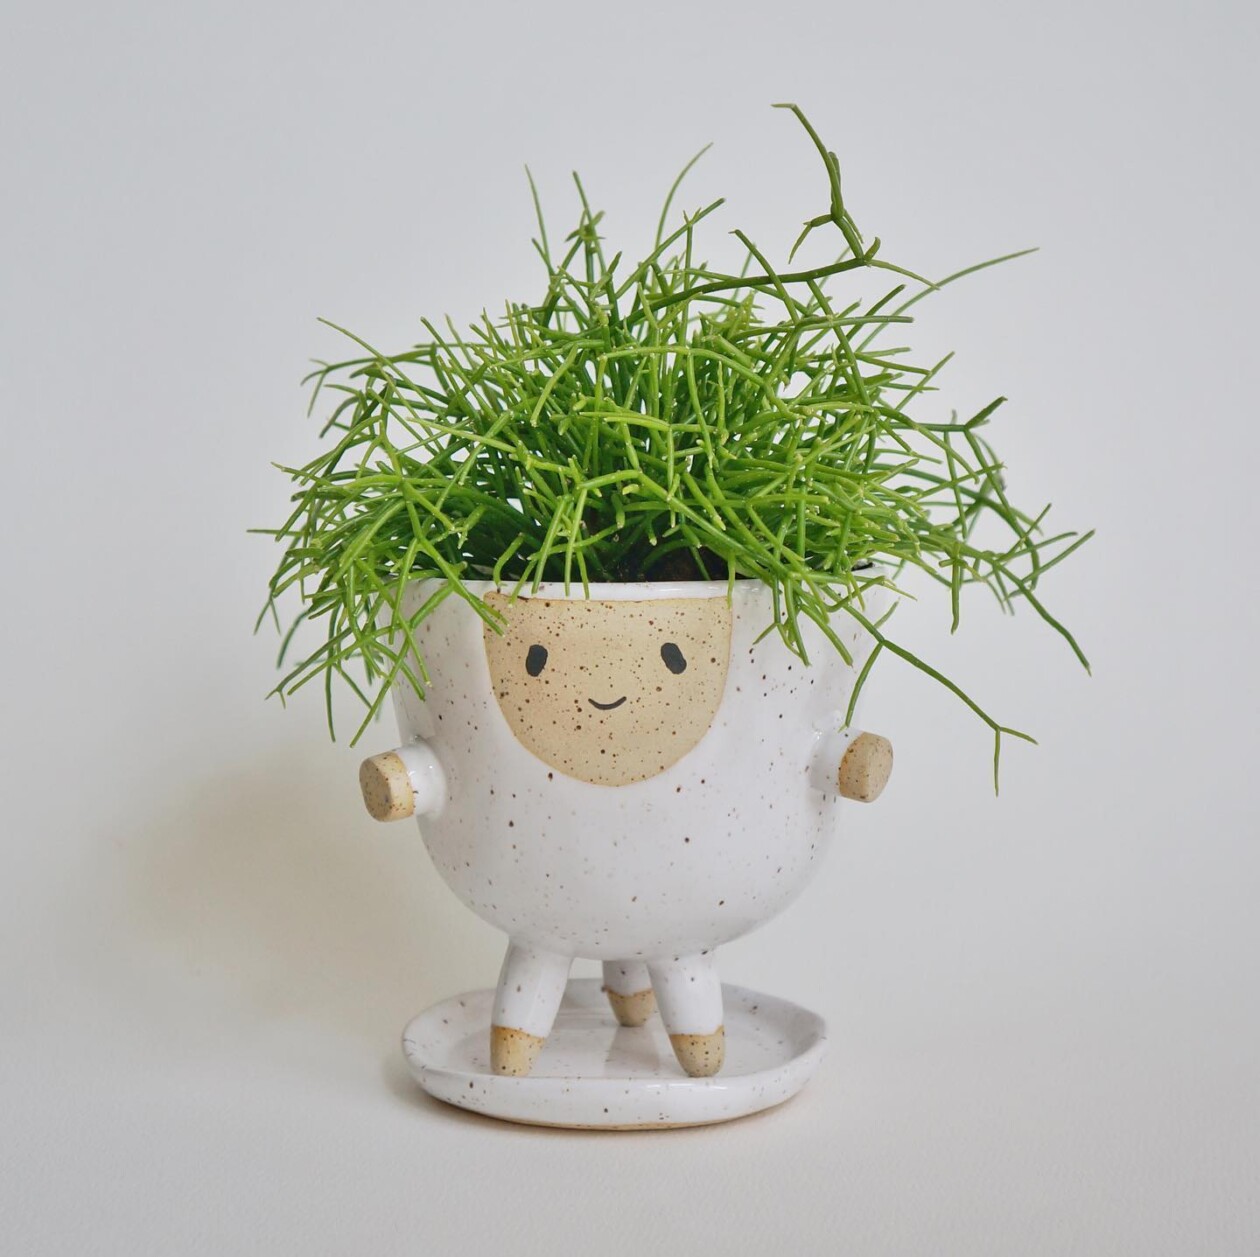 Amusing And Adorable Anthropomorphic Planters By Abby Ozaltug (18)